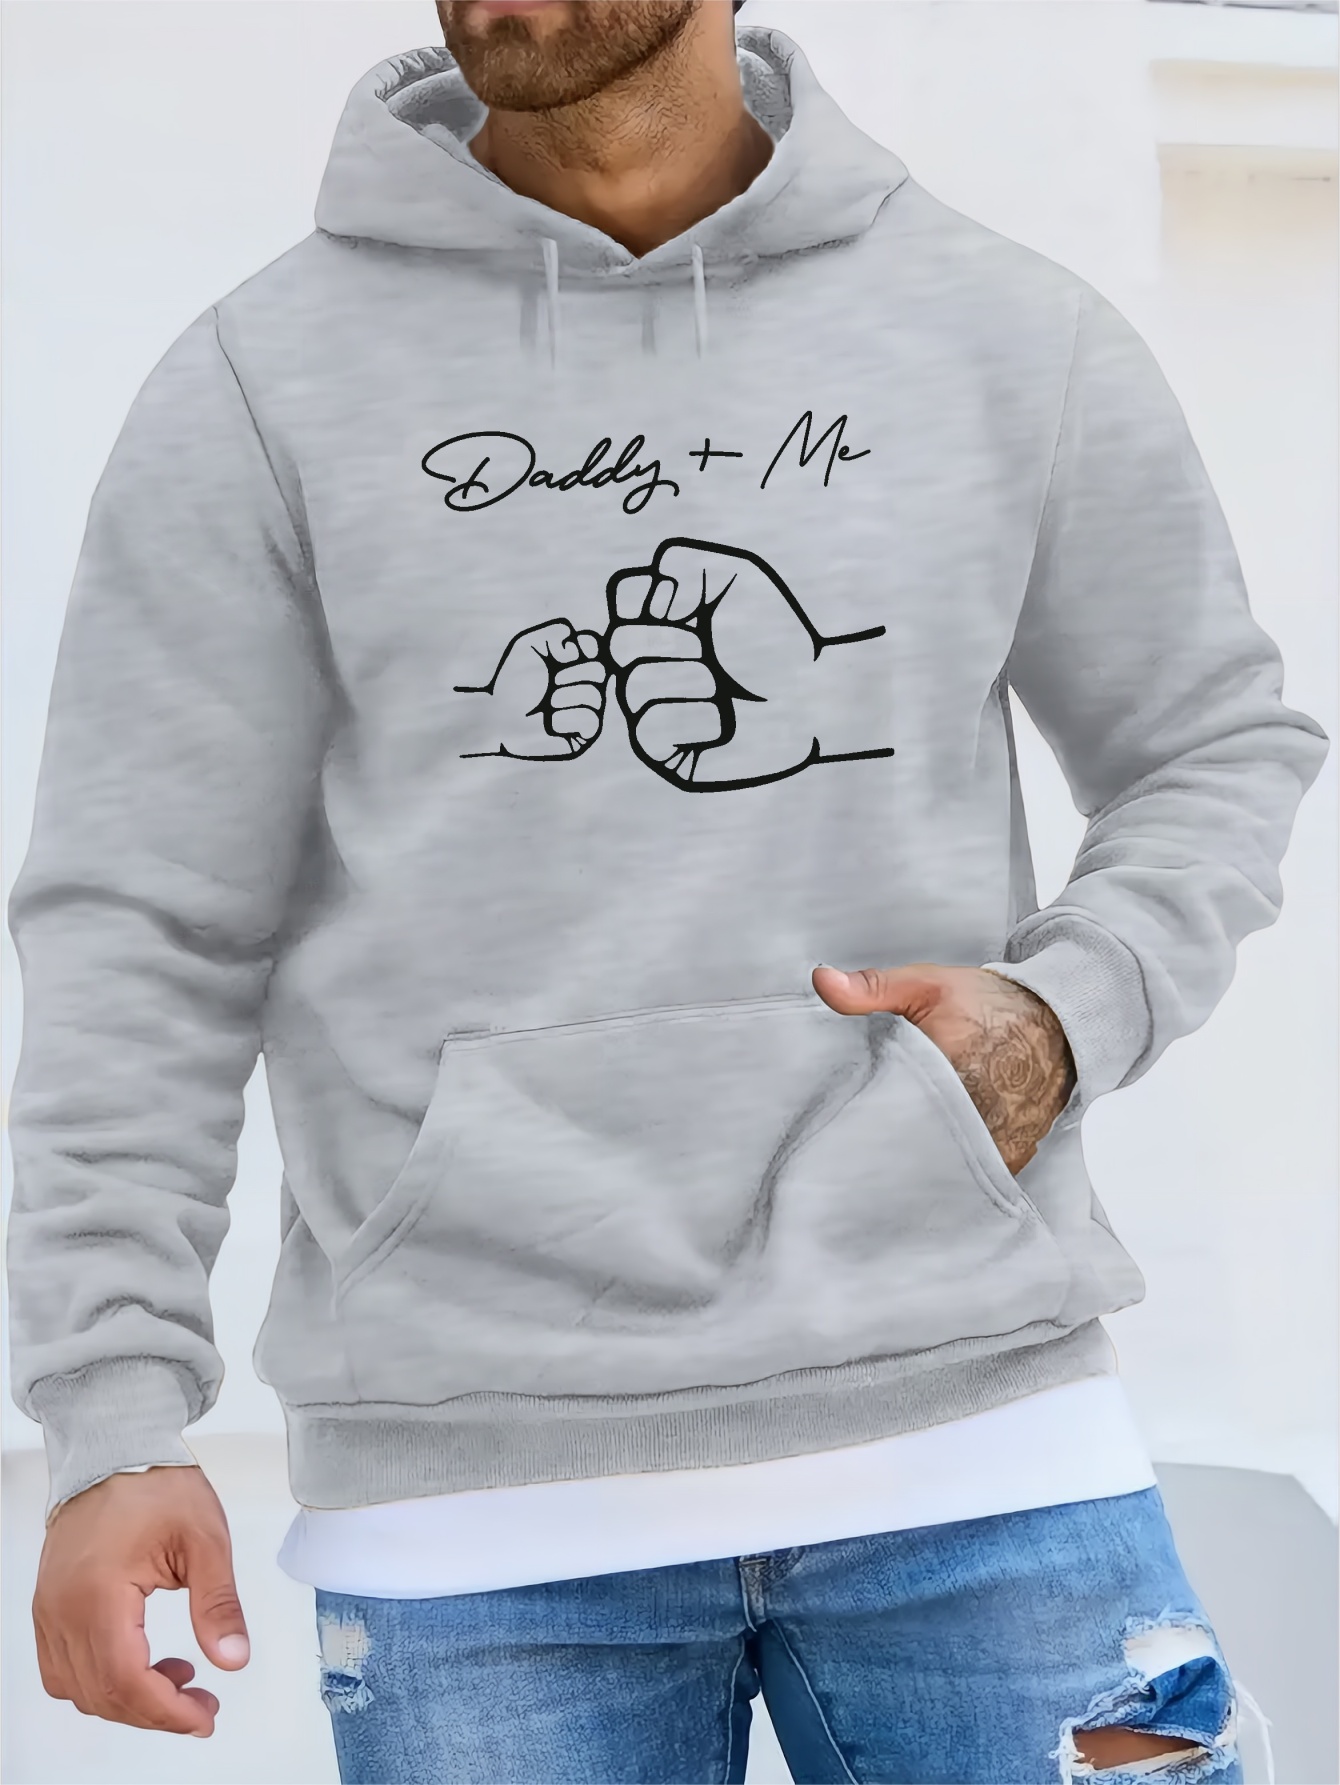 daddy me print kangaroo pocket fleece sweatshirt hoodie pullover fashion street style long sleeve sports tops graphic pullover shirts for men autumn winter gifts details 20